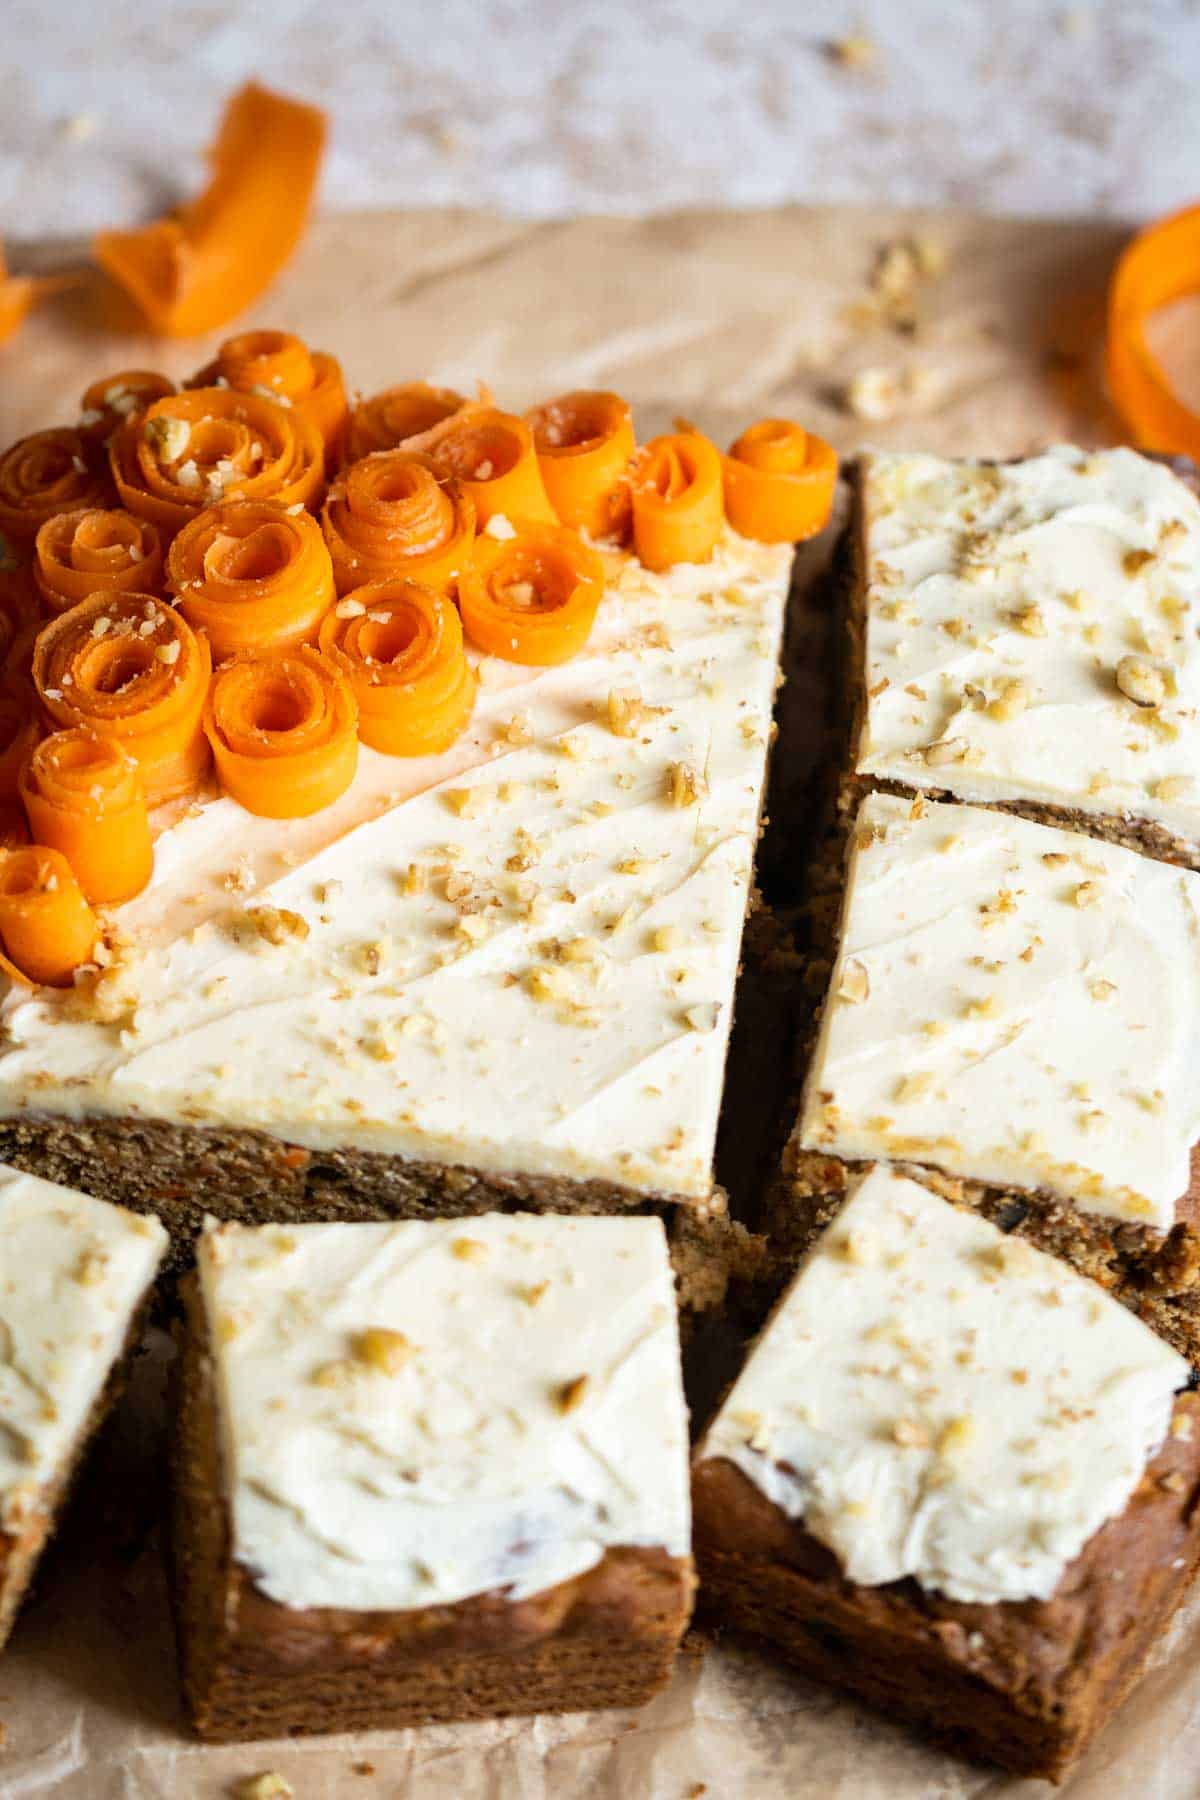 Carrot cake cut into slices.